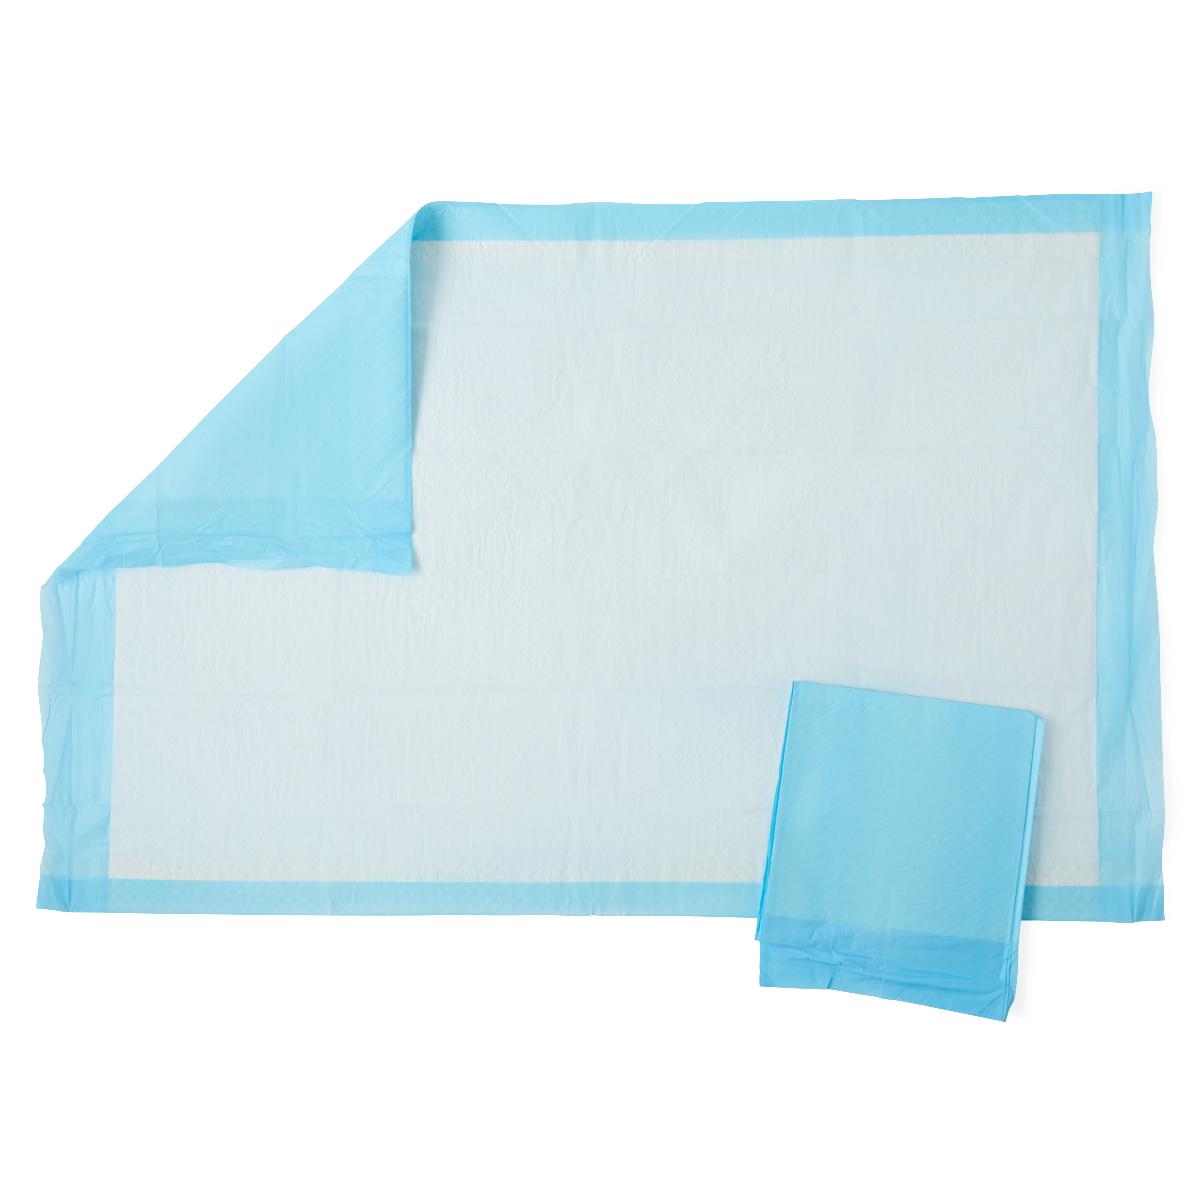 150 Each-Case / Blue / 23" X 36" Incontinence - MEDLINE - Wasatch Medical Supply